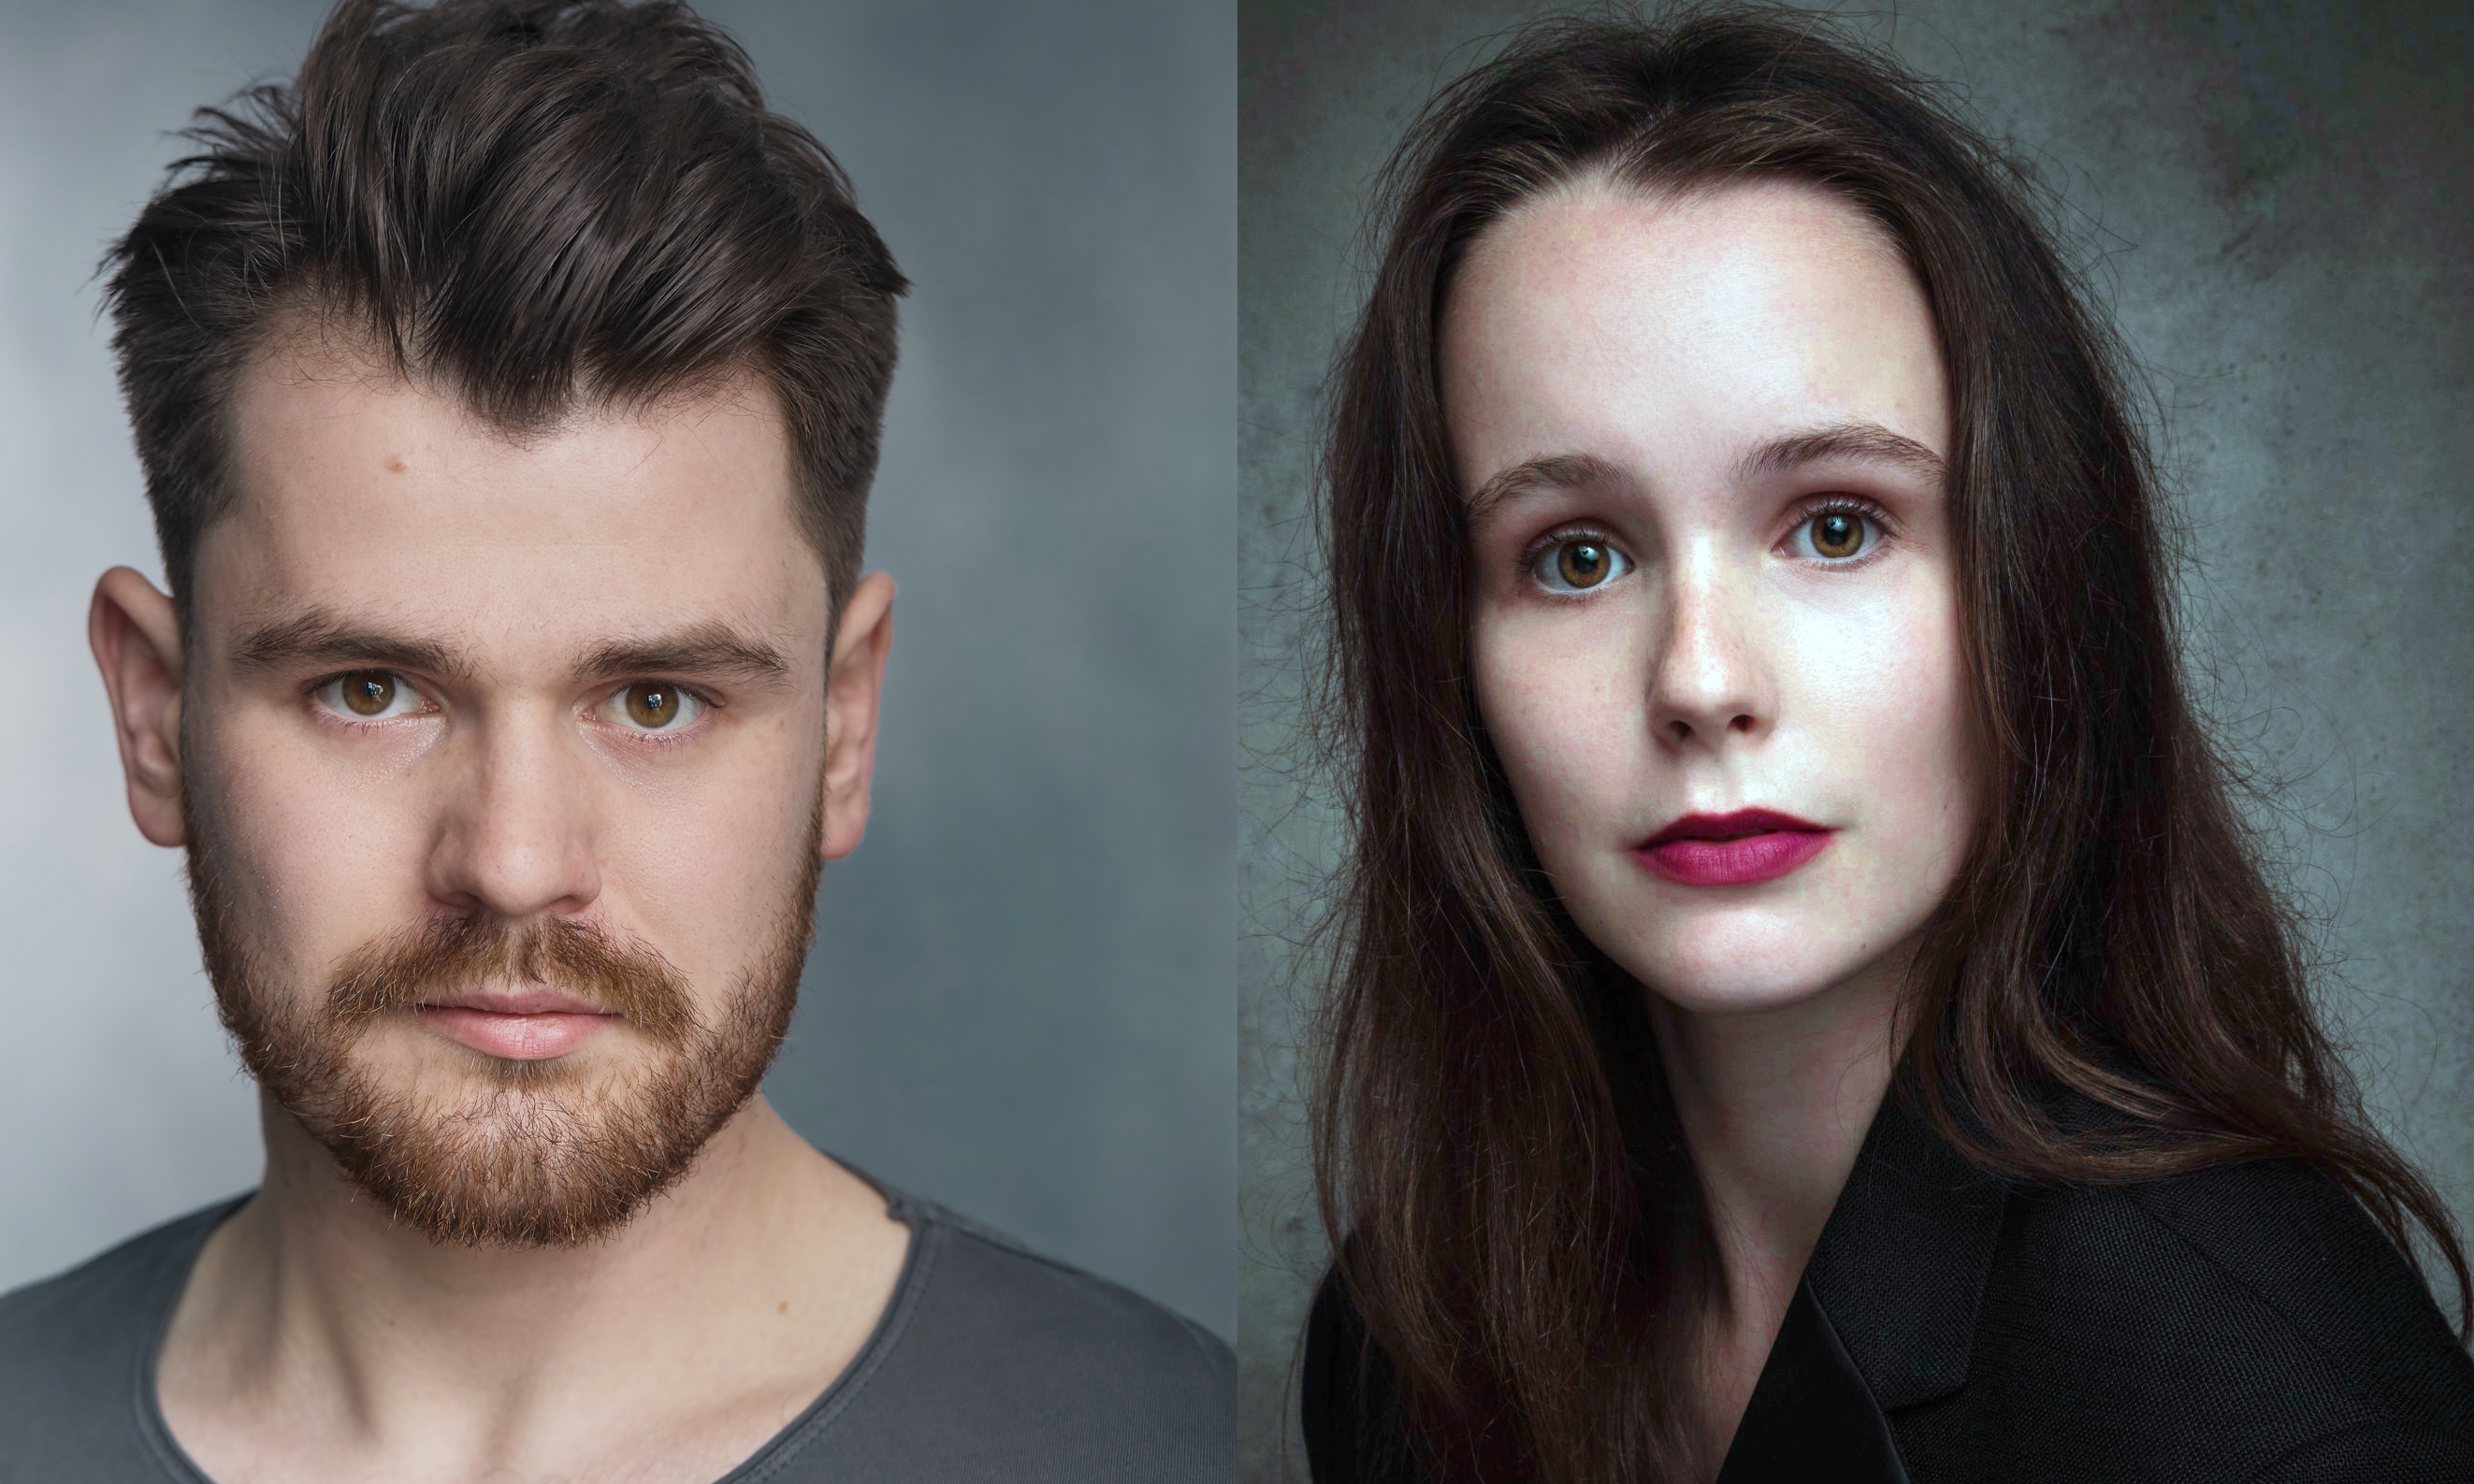 Elgin actor Lewie Watson featured in the production alongside Sophie Macnai from Glasgow.